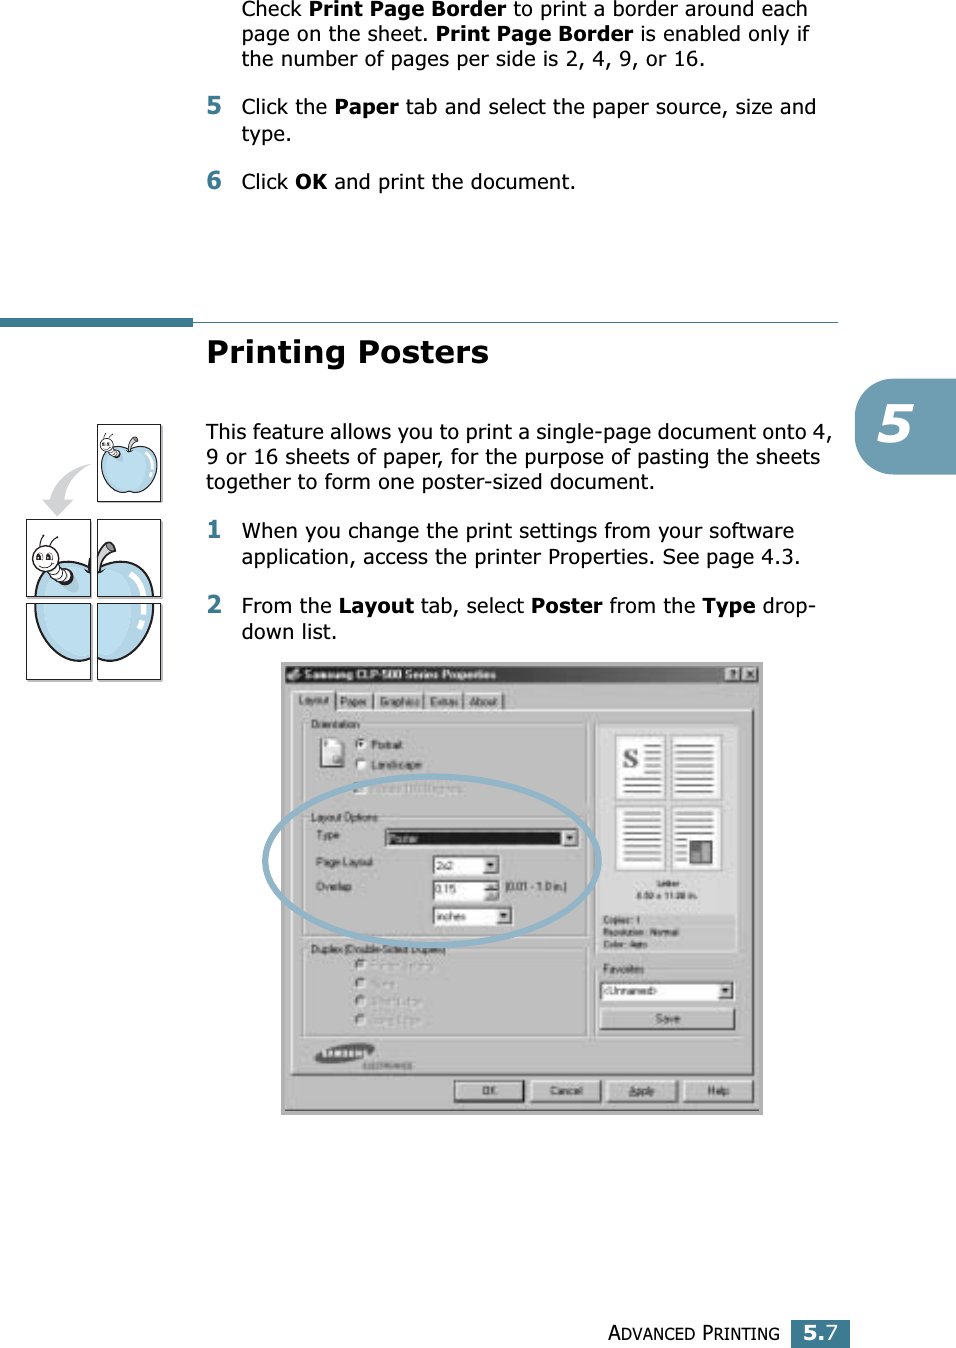 ADVANCED PRINTING5.75Check Print Page Border to print a border around each page on the sheet. Print Page Border is enabled only if the number of pages per side is 2, 4, 9, or 16.5Click the Paper tab and select the paper source, size and type.6Click OK and print the document. Printing PostersThis feature allows you to print a single-page document onto 4, 9 or 16 sheets of paper, for the purpose of pasting the sheets together to form one poster-sized document.1When you change the print settings from your software application, access the printer Properties. See page 4.3.2From the Layout tab, select Poster from the Type drop-down list. 